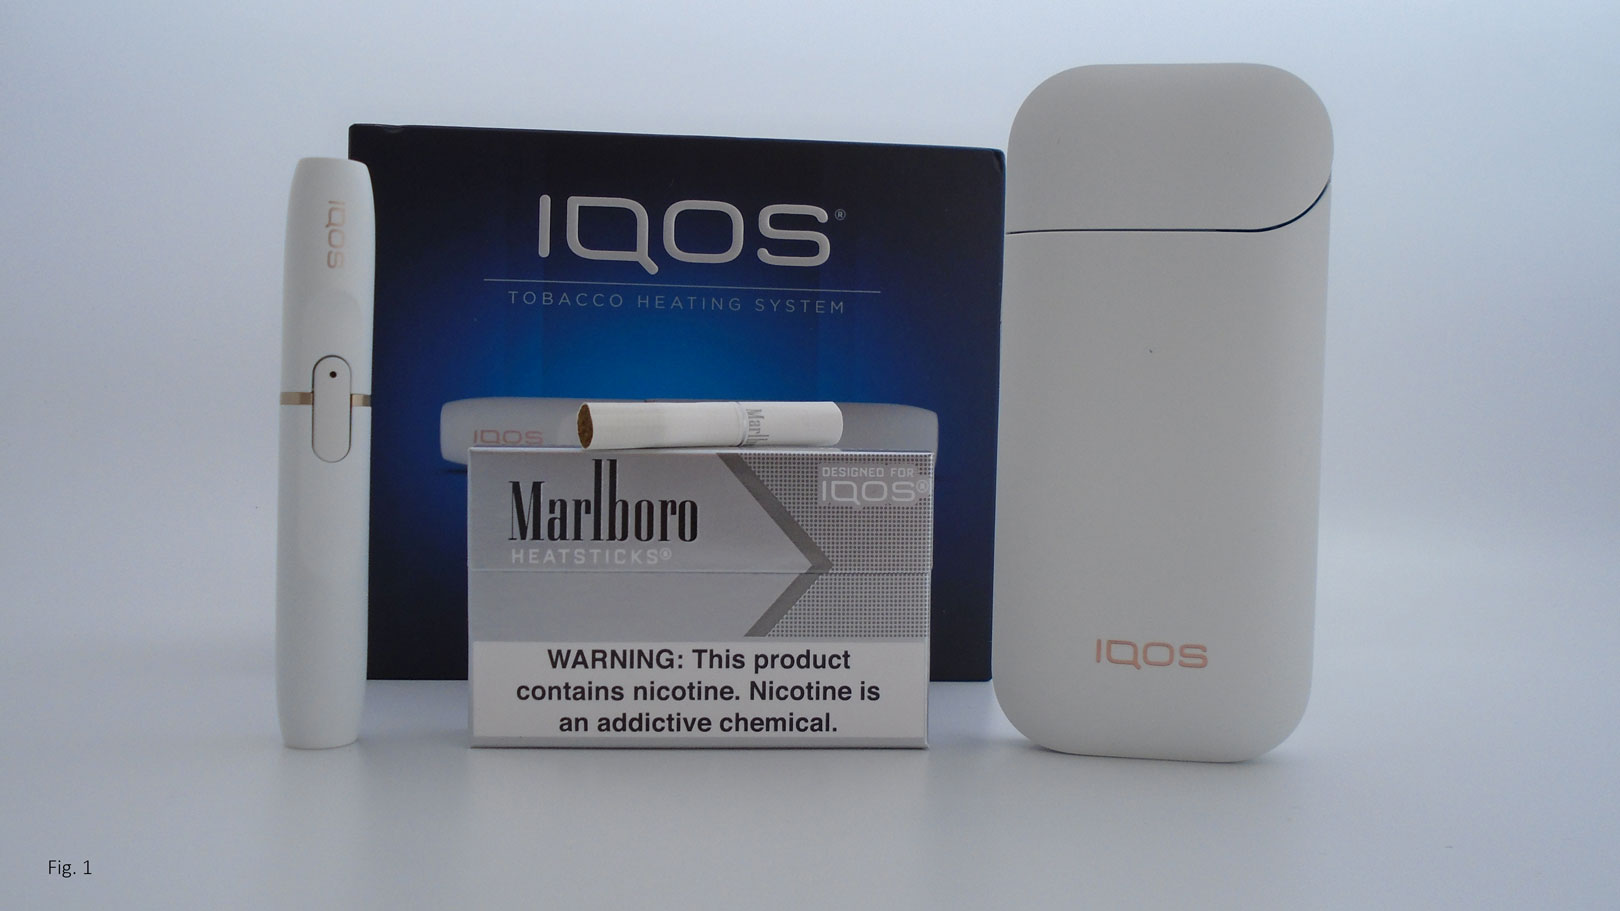 Controversy Regarding U.S. Marketing of New Heated Tobacco Product